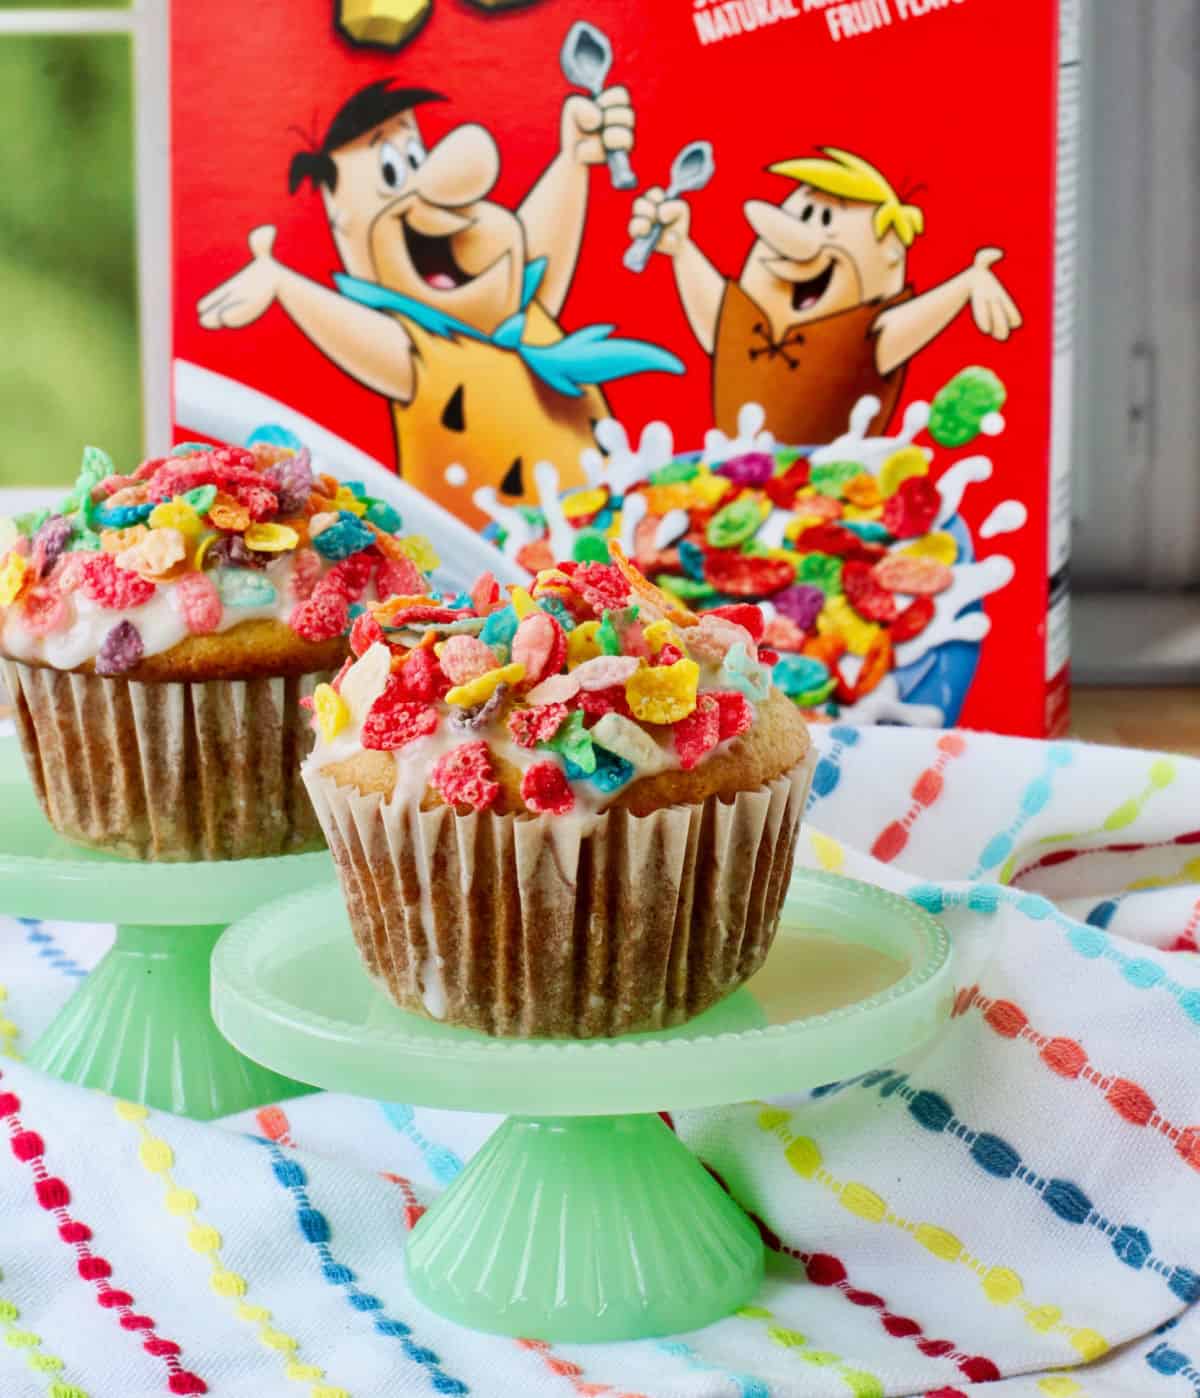 Cereal Milk Muffins with a box of Fruity Pebbles in the background.